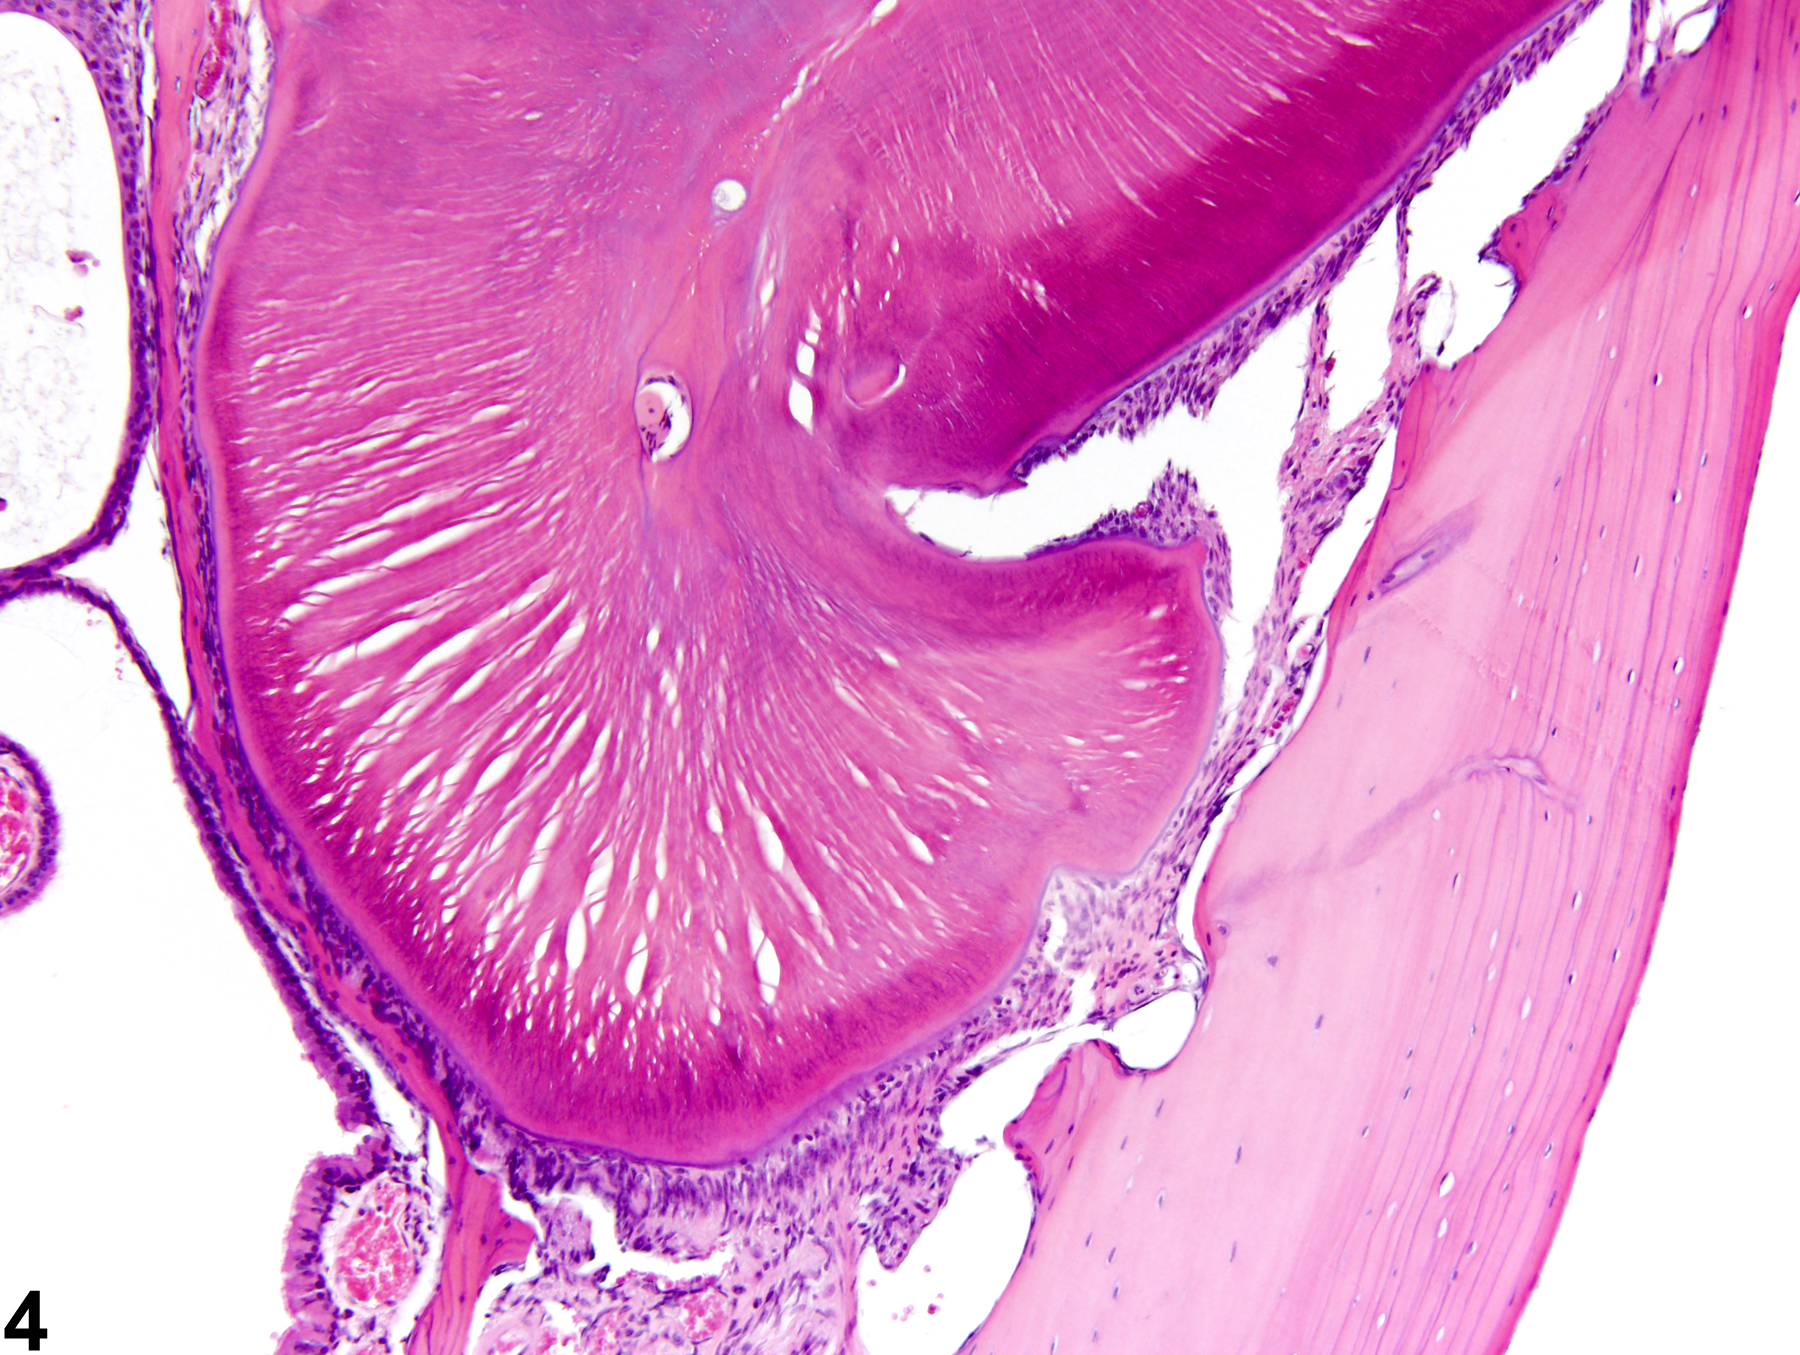 Image of dental dysplasia in the tooth from a male B6C3F1 mouse in a subchronic study